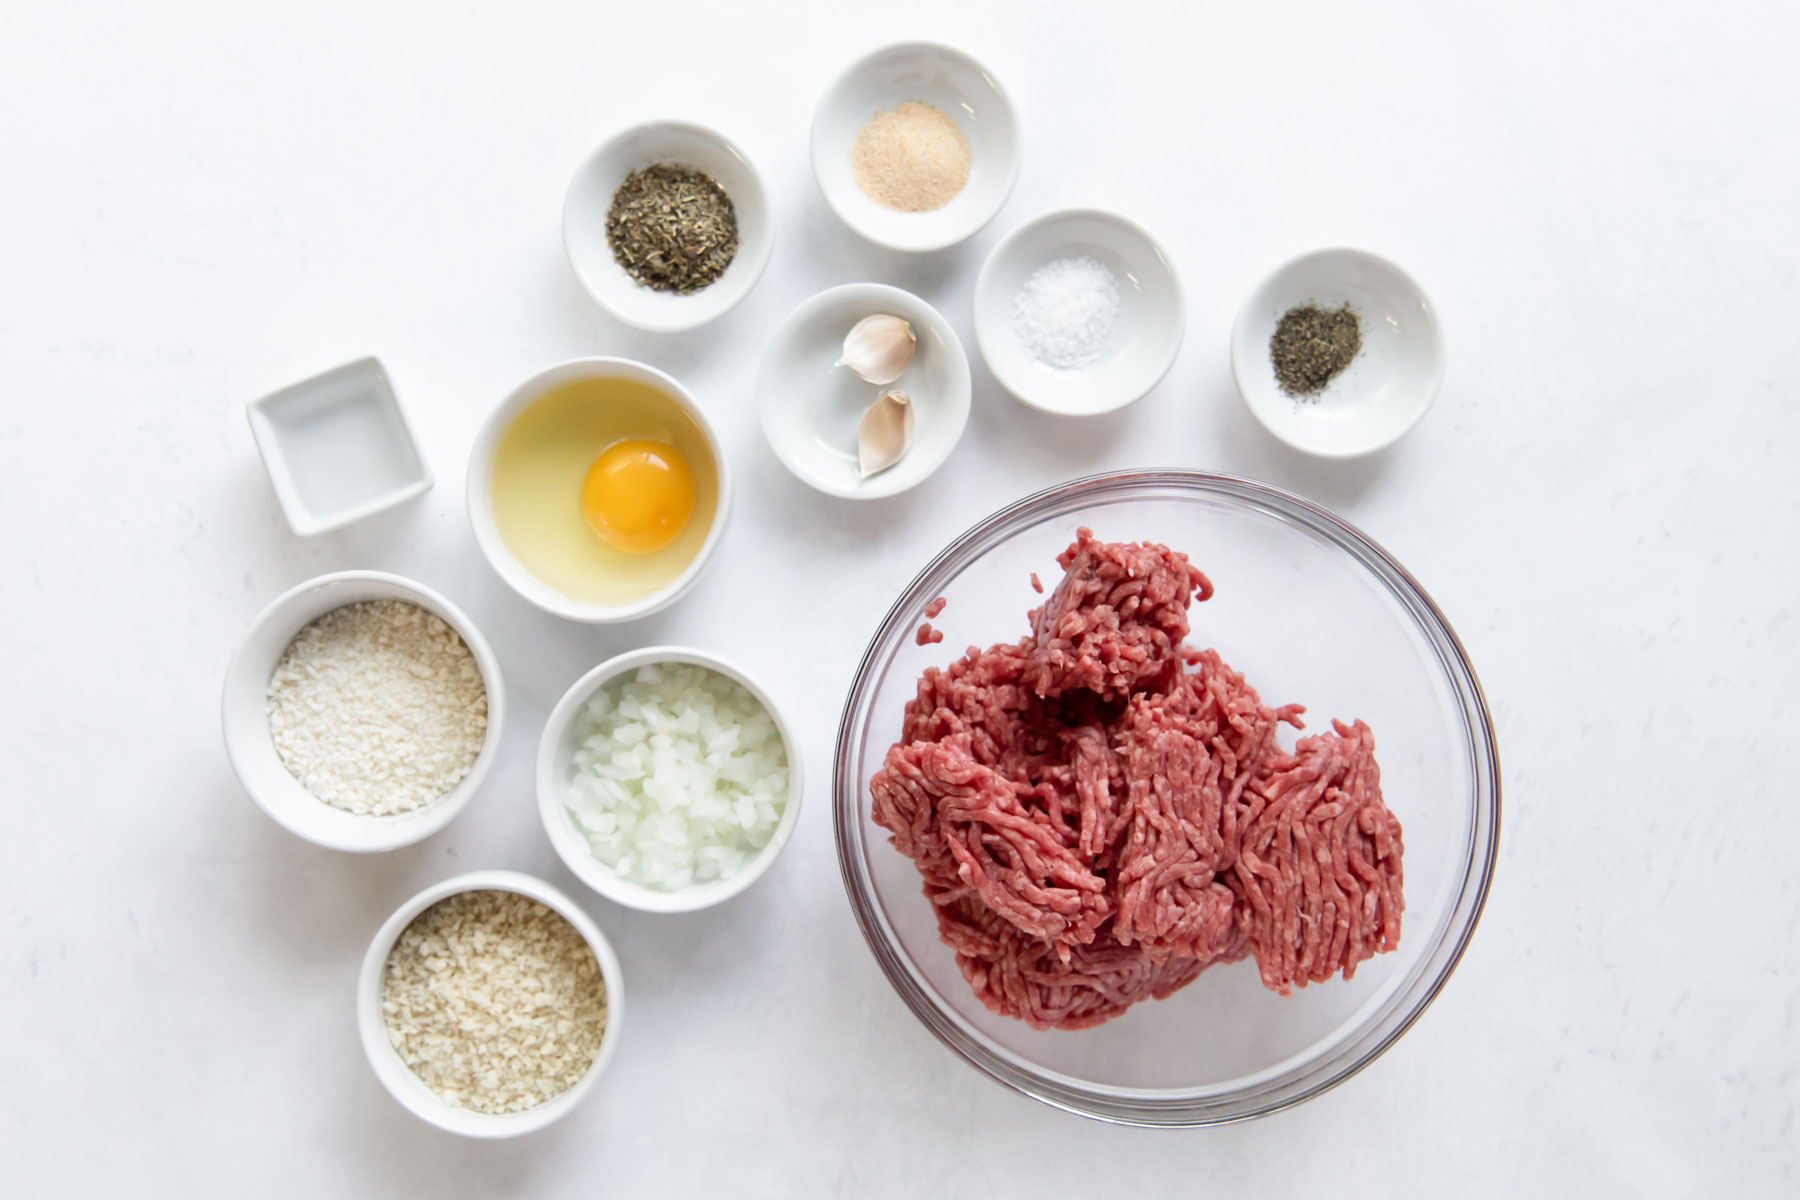 ingredients for meatball recipe